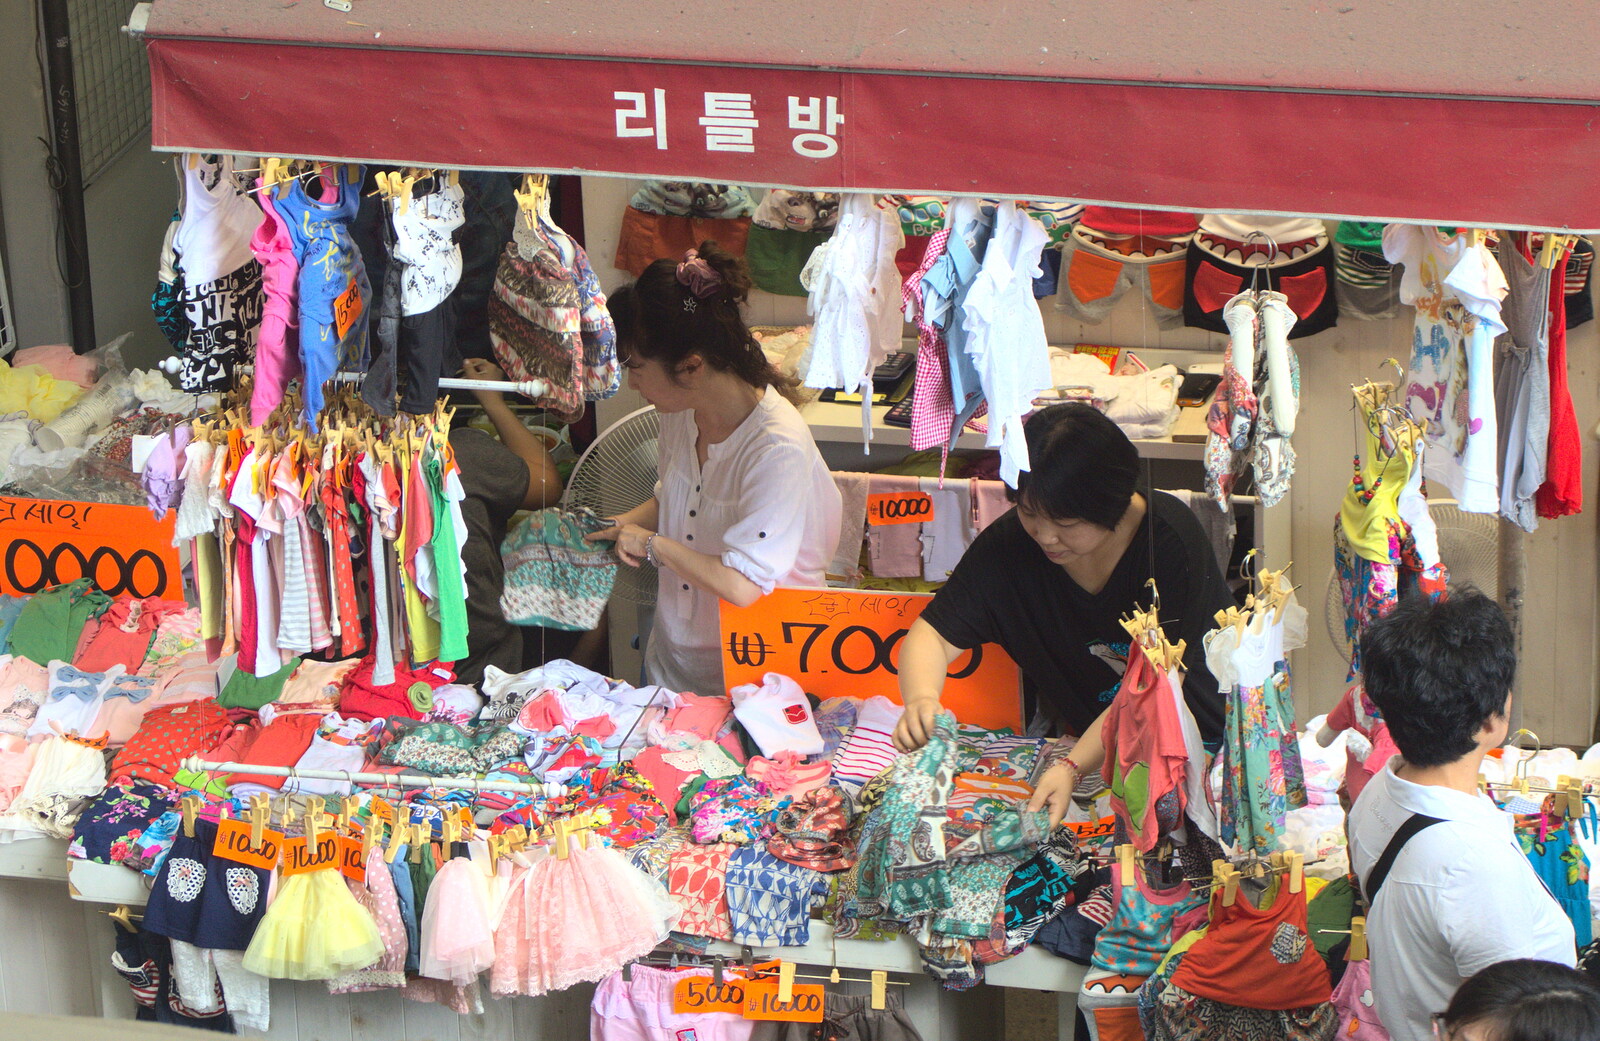 Another clothes shop from Seomun Market, Daegu, South Korea - 1st July 2012